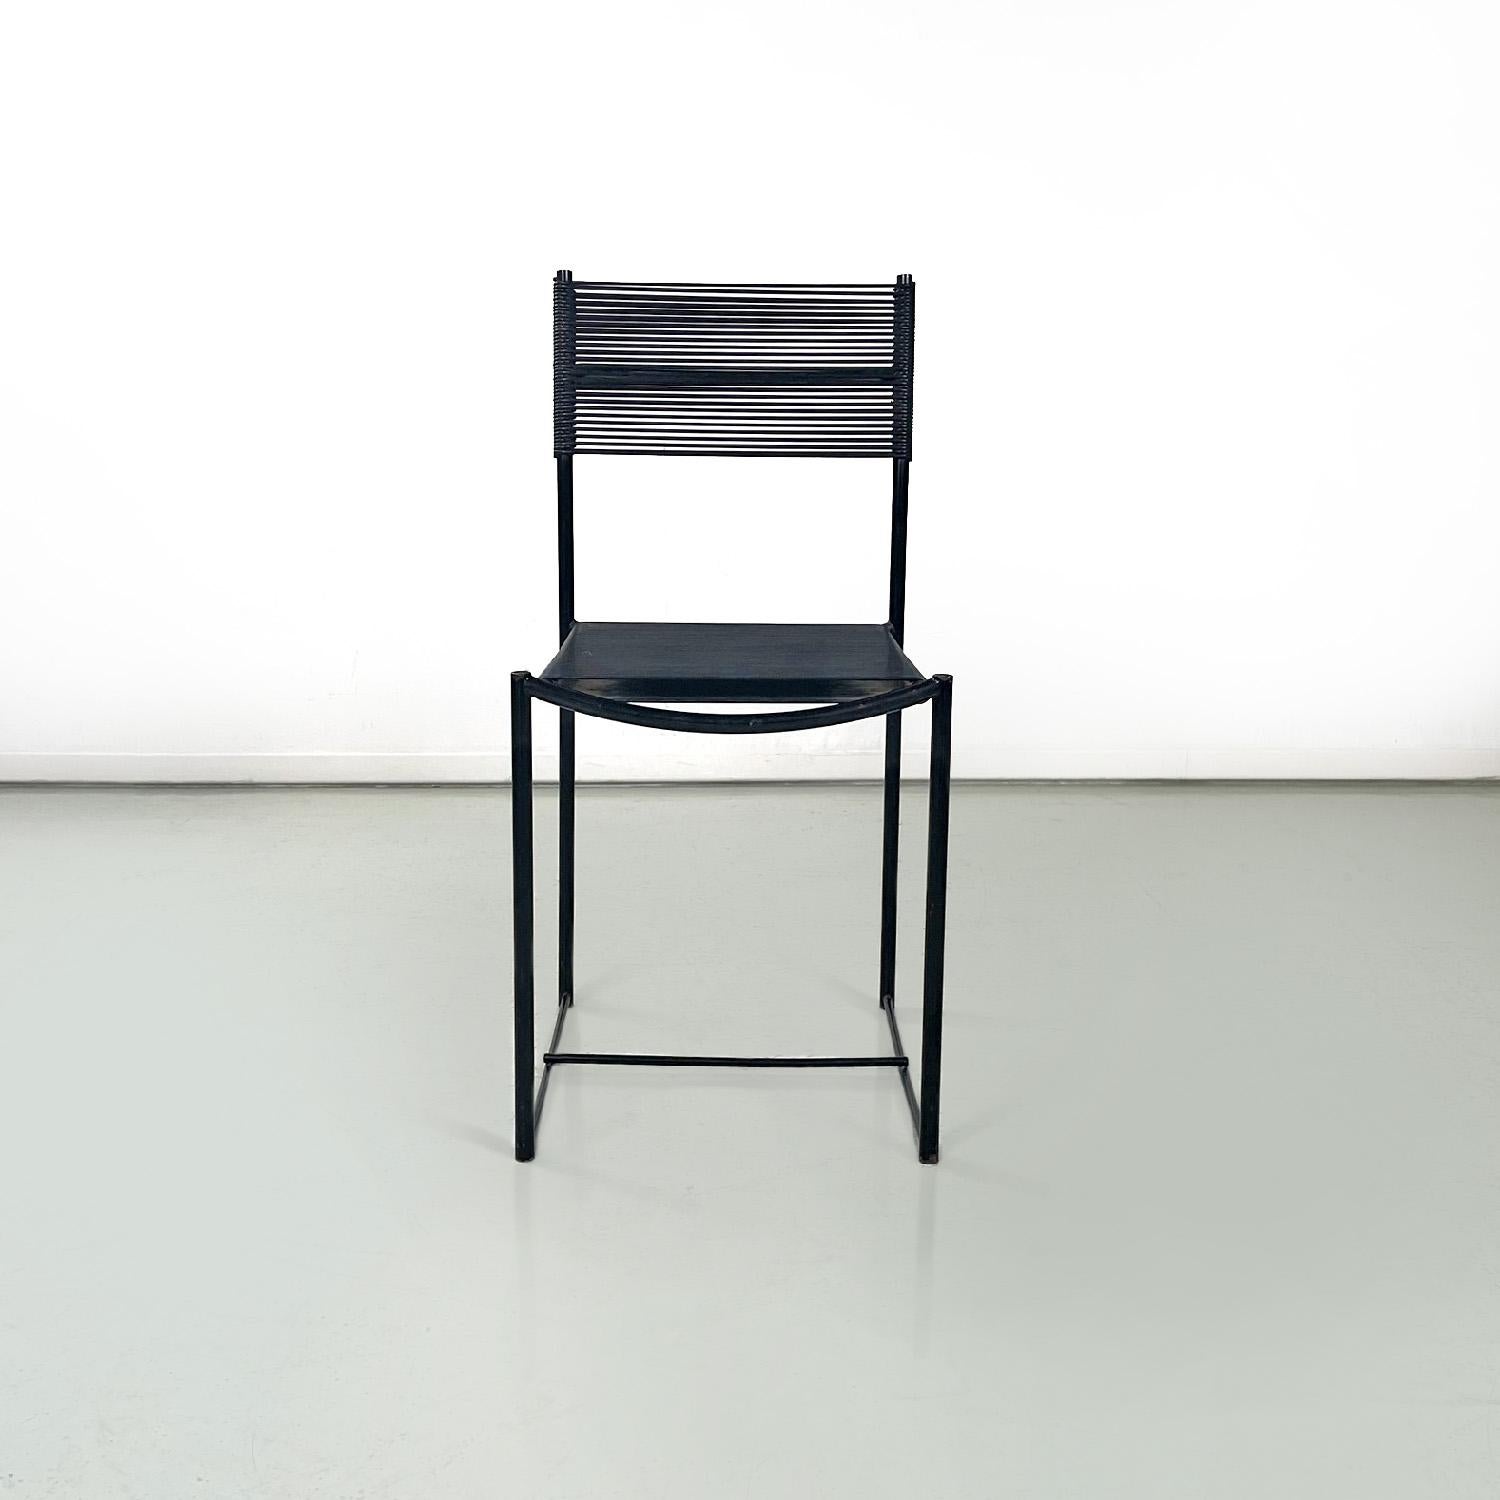 Italian modern black chairs Spaghetti by Giandomenico Belotti for Alias, 1980s
Set of six chairs mod. Spaghetti  with rectangular and elastic seat and back made from black scooby threads. The structure is in black painted metal rod with curved